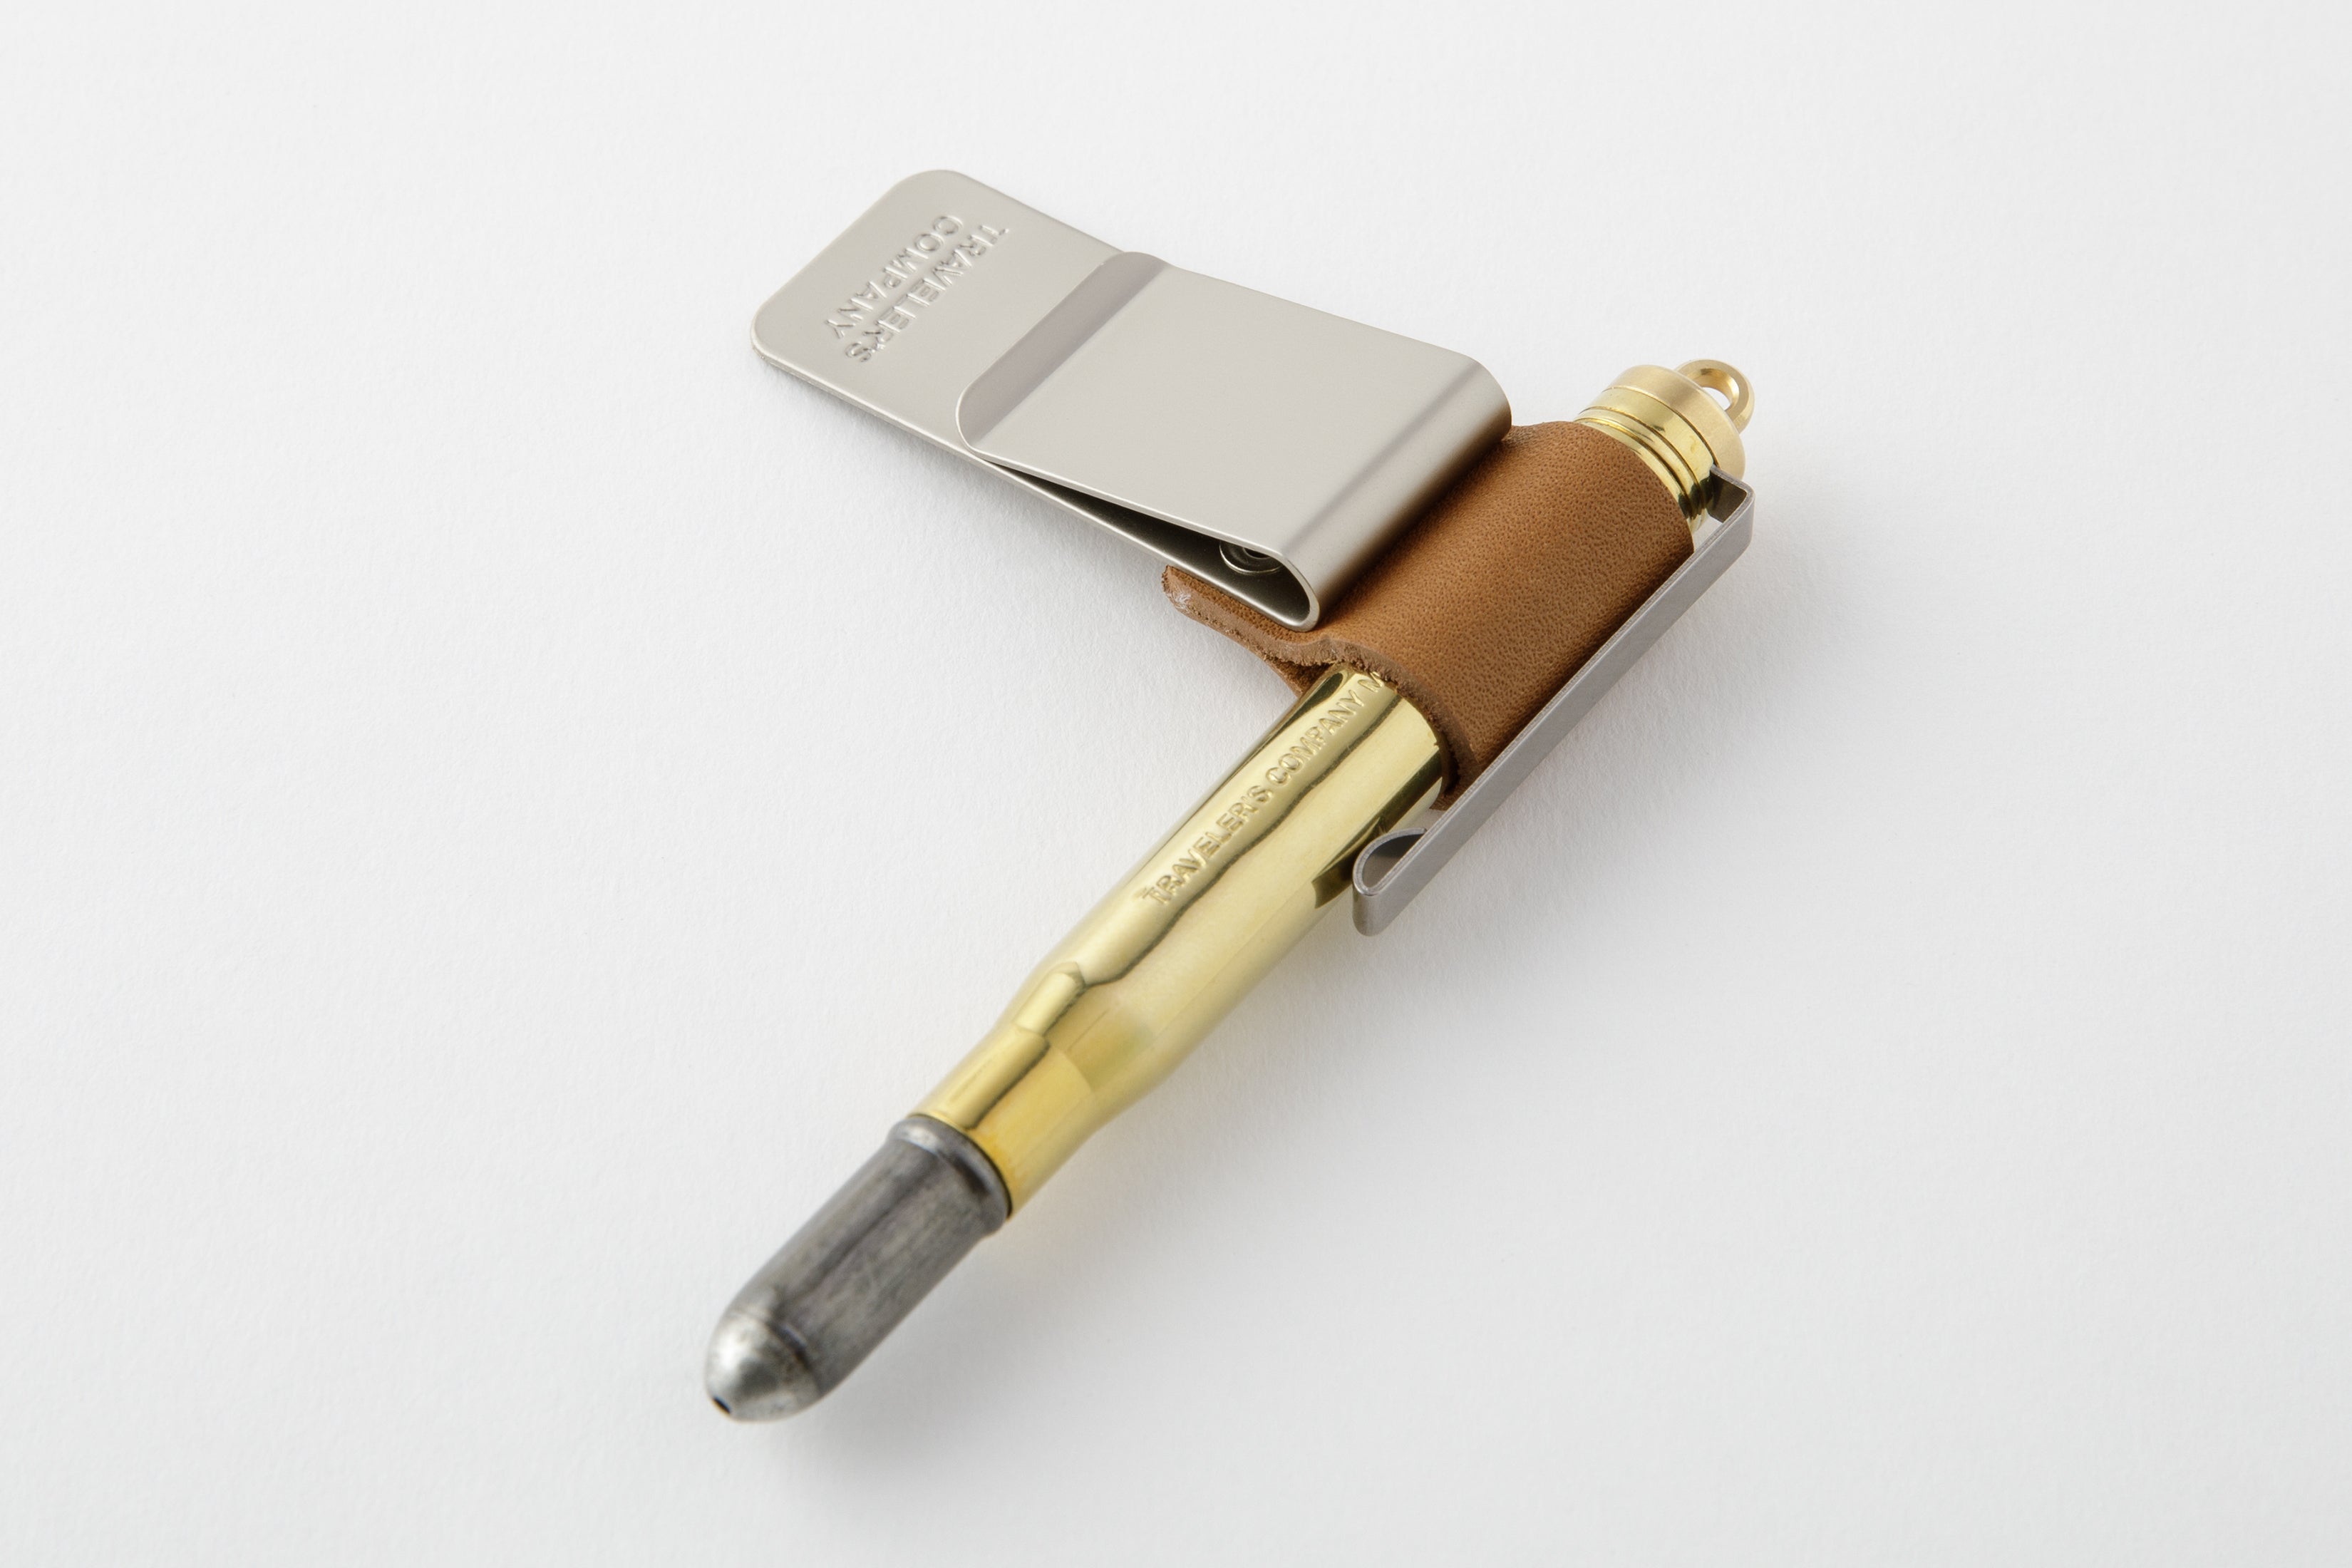 Add a pen holder to any book, notebook, or journal - The Gadgeteer